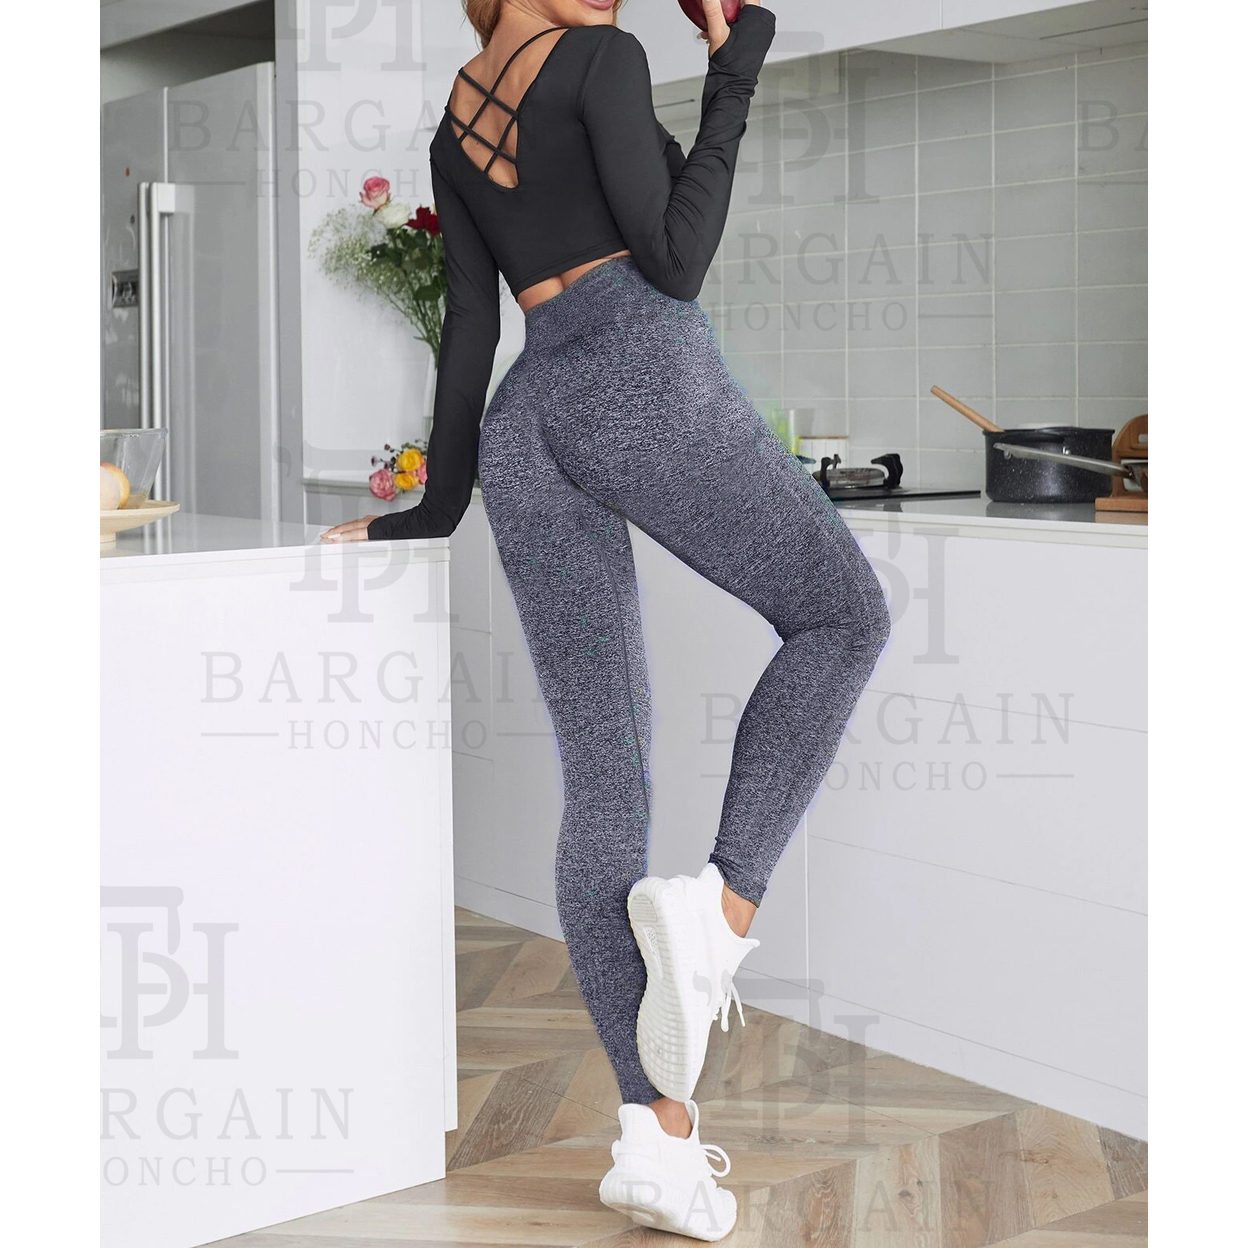 Women's High Waisted Ultra-Soft Fleece Lined Warm Marled Leggings(Available In Plus Sizes) - Charcoal, Small